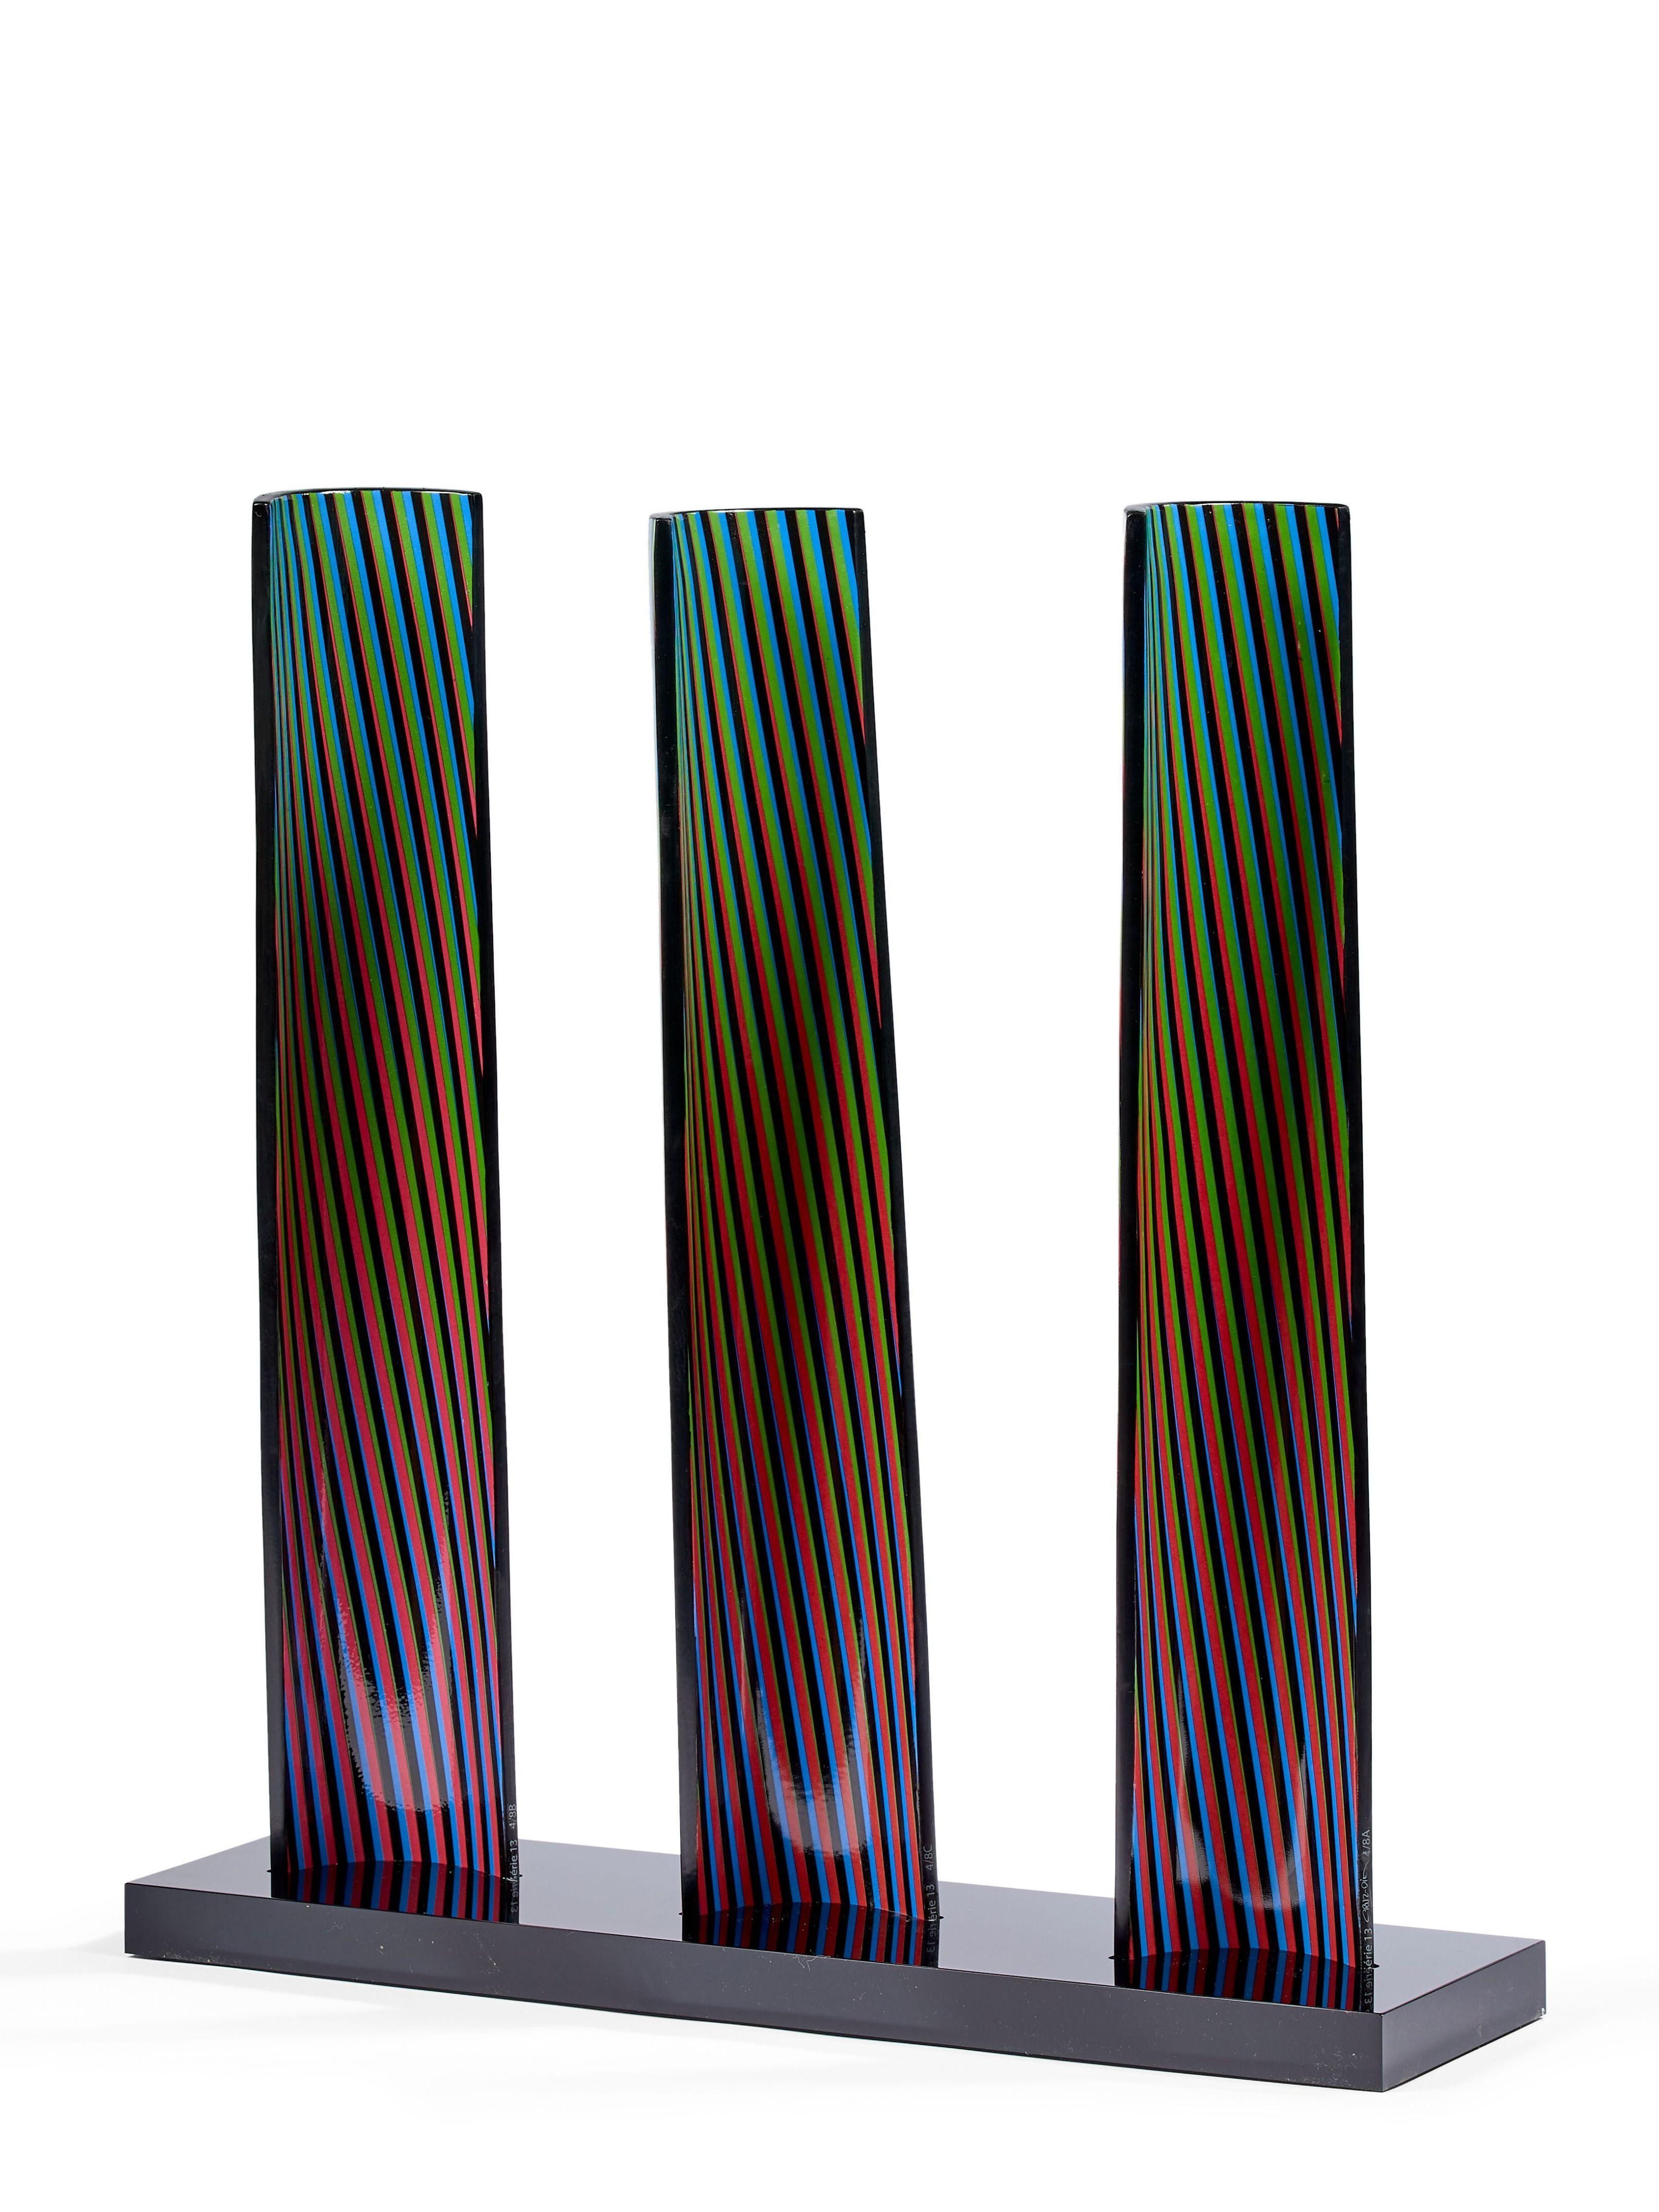 CARLOS CRUZ-DÍEZ - CROMOVELA TRIPTYCH 13

Date of creation: 2018
Medium: Polychrome ceramic
Edition: 8
Size: 60 x 50 x 13 cm
Condition: In mint condition
This beautiful sculpture consists of three polychrome ceramic Cromovelas. The edition is